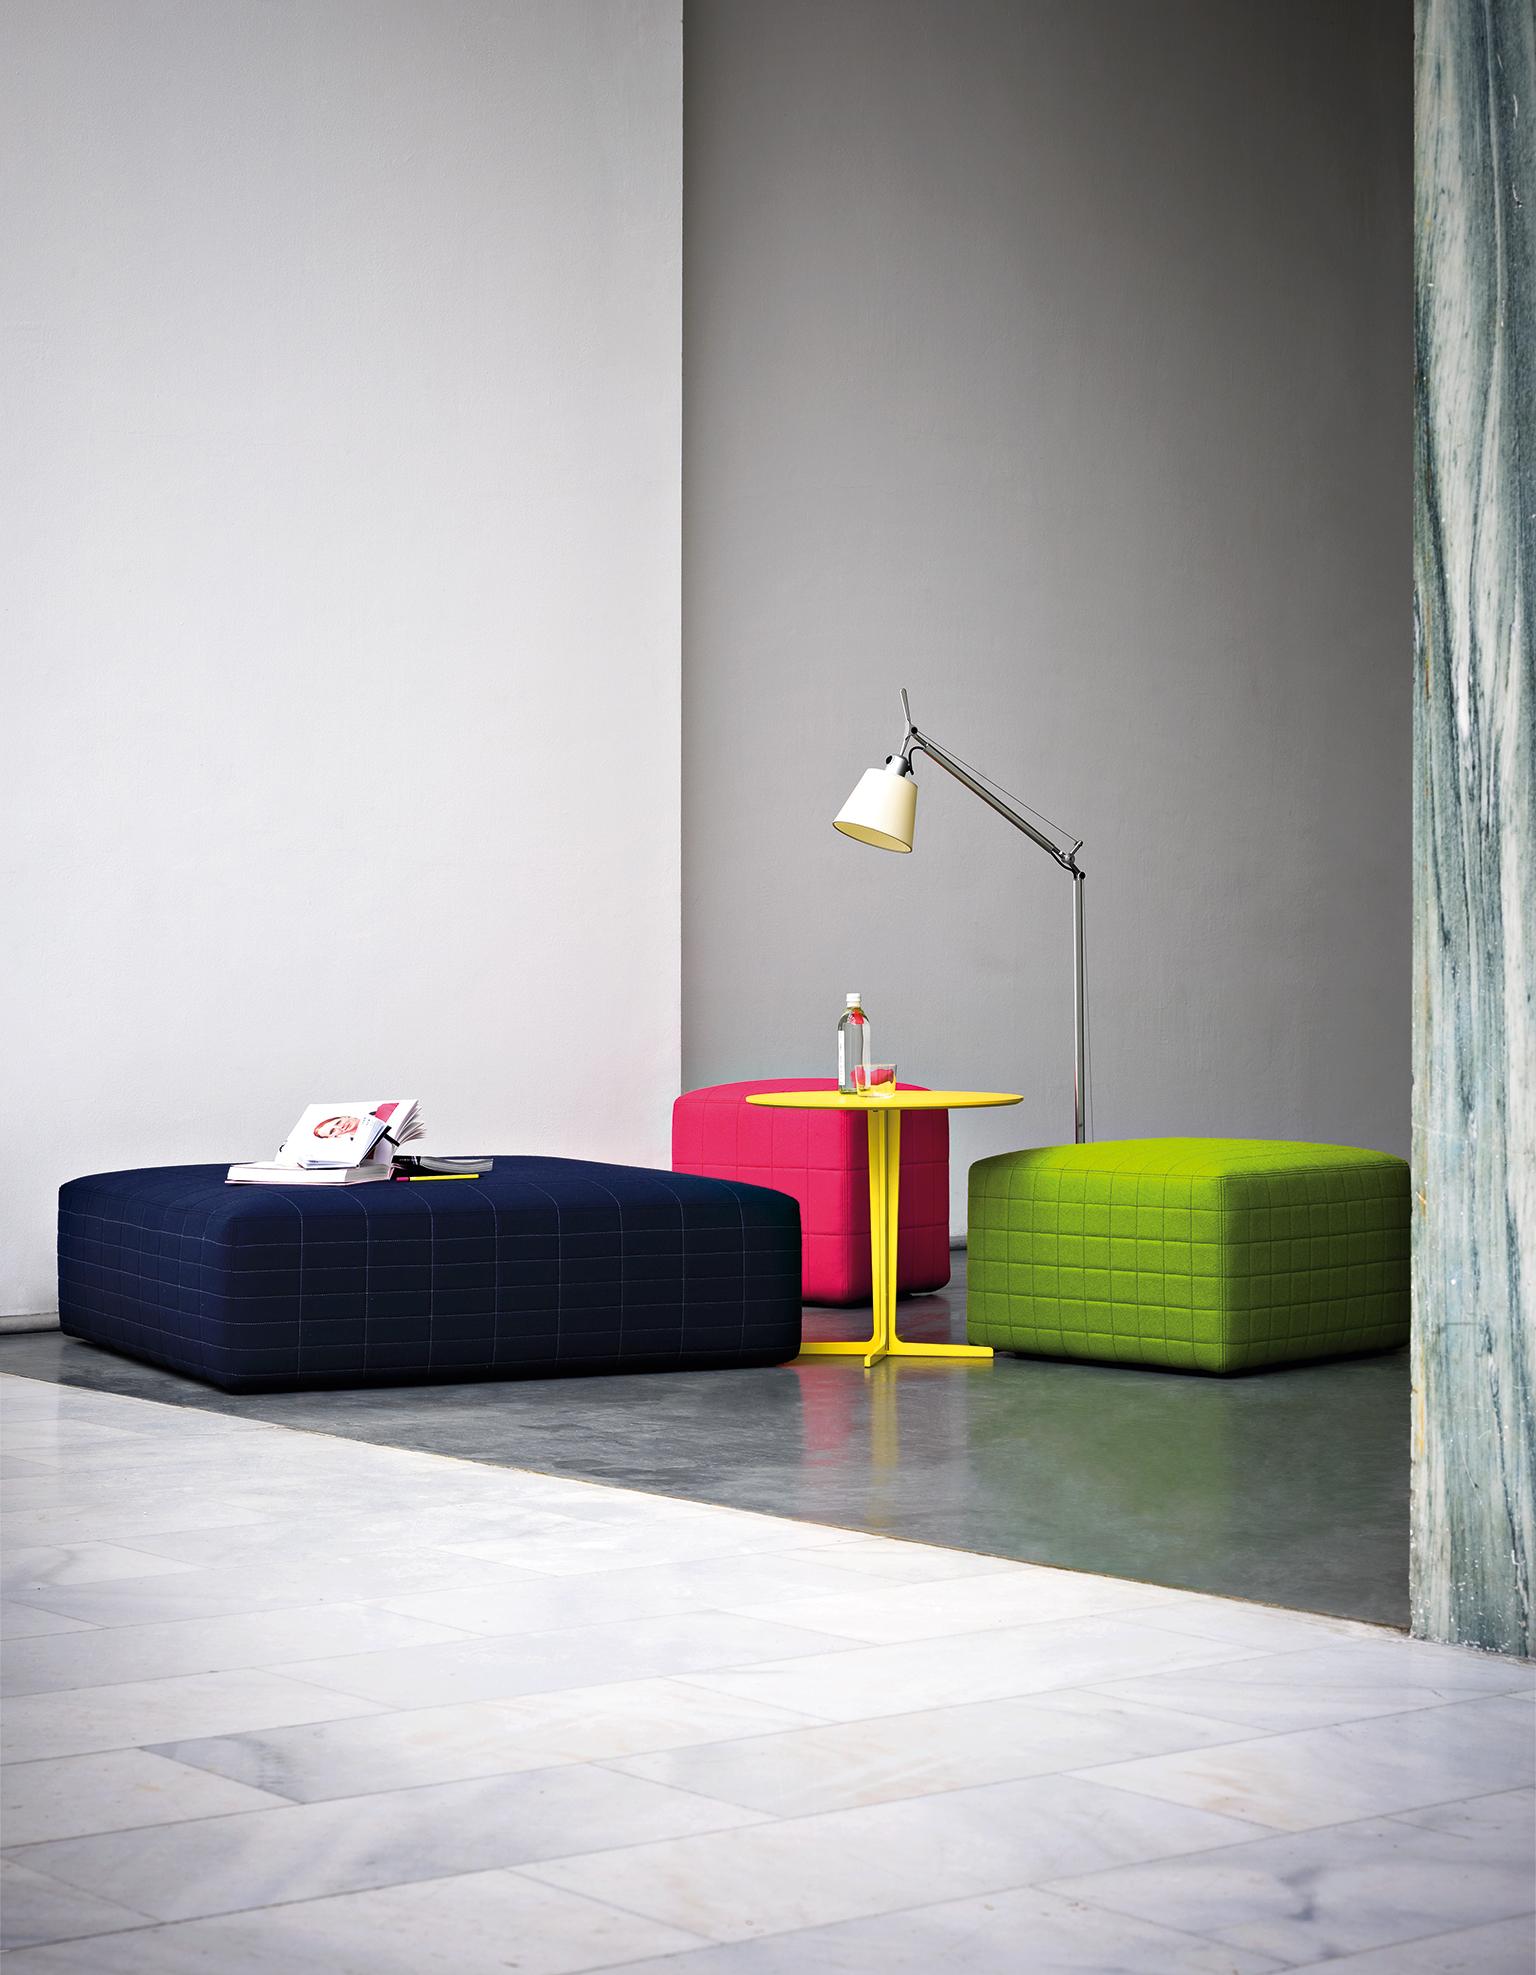 A metropolis of buildings in miniature, colourful, soft and cosy, to combine the wide range of differing private and public areas. This is the creative idea from which arise the new ottoman Quartier. Design Claesson Koivisto Rune, available in three